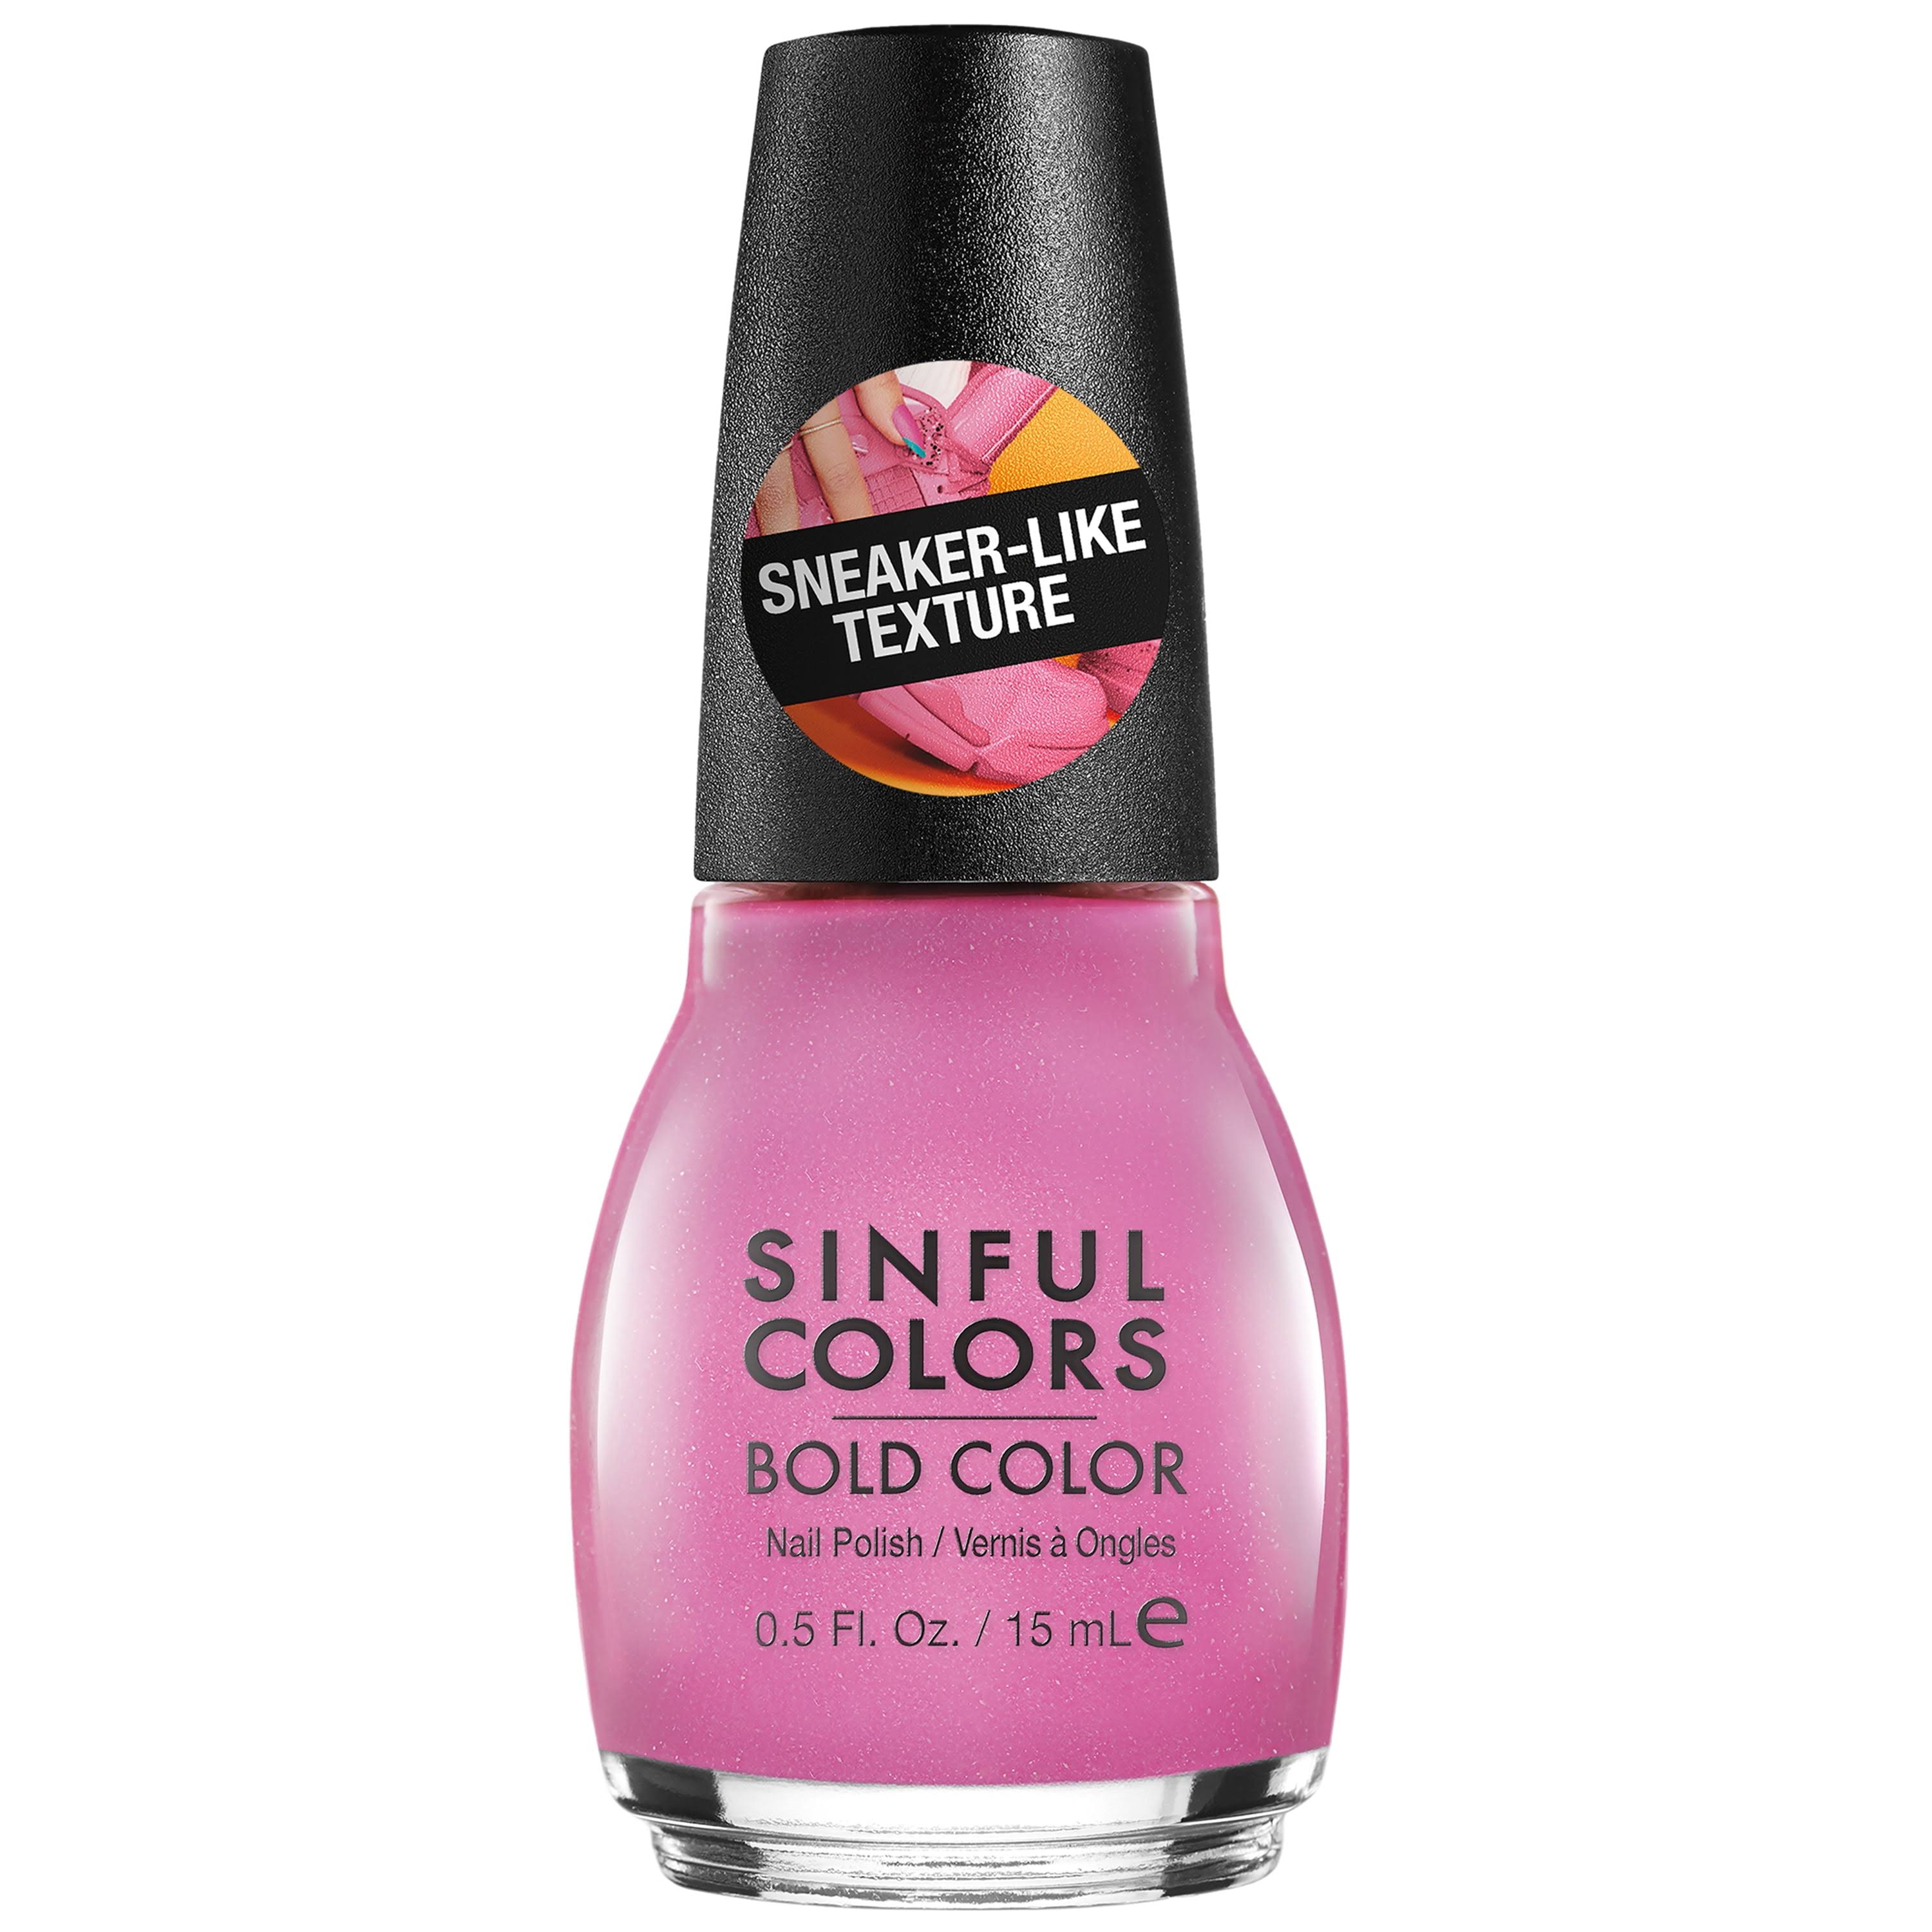 Sinful Colors Sporty Brights Nail Polish, Fit Chick